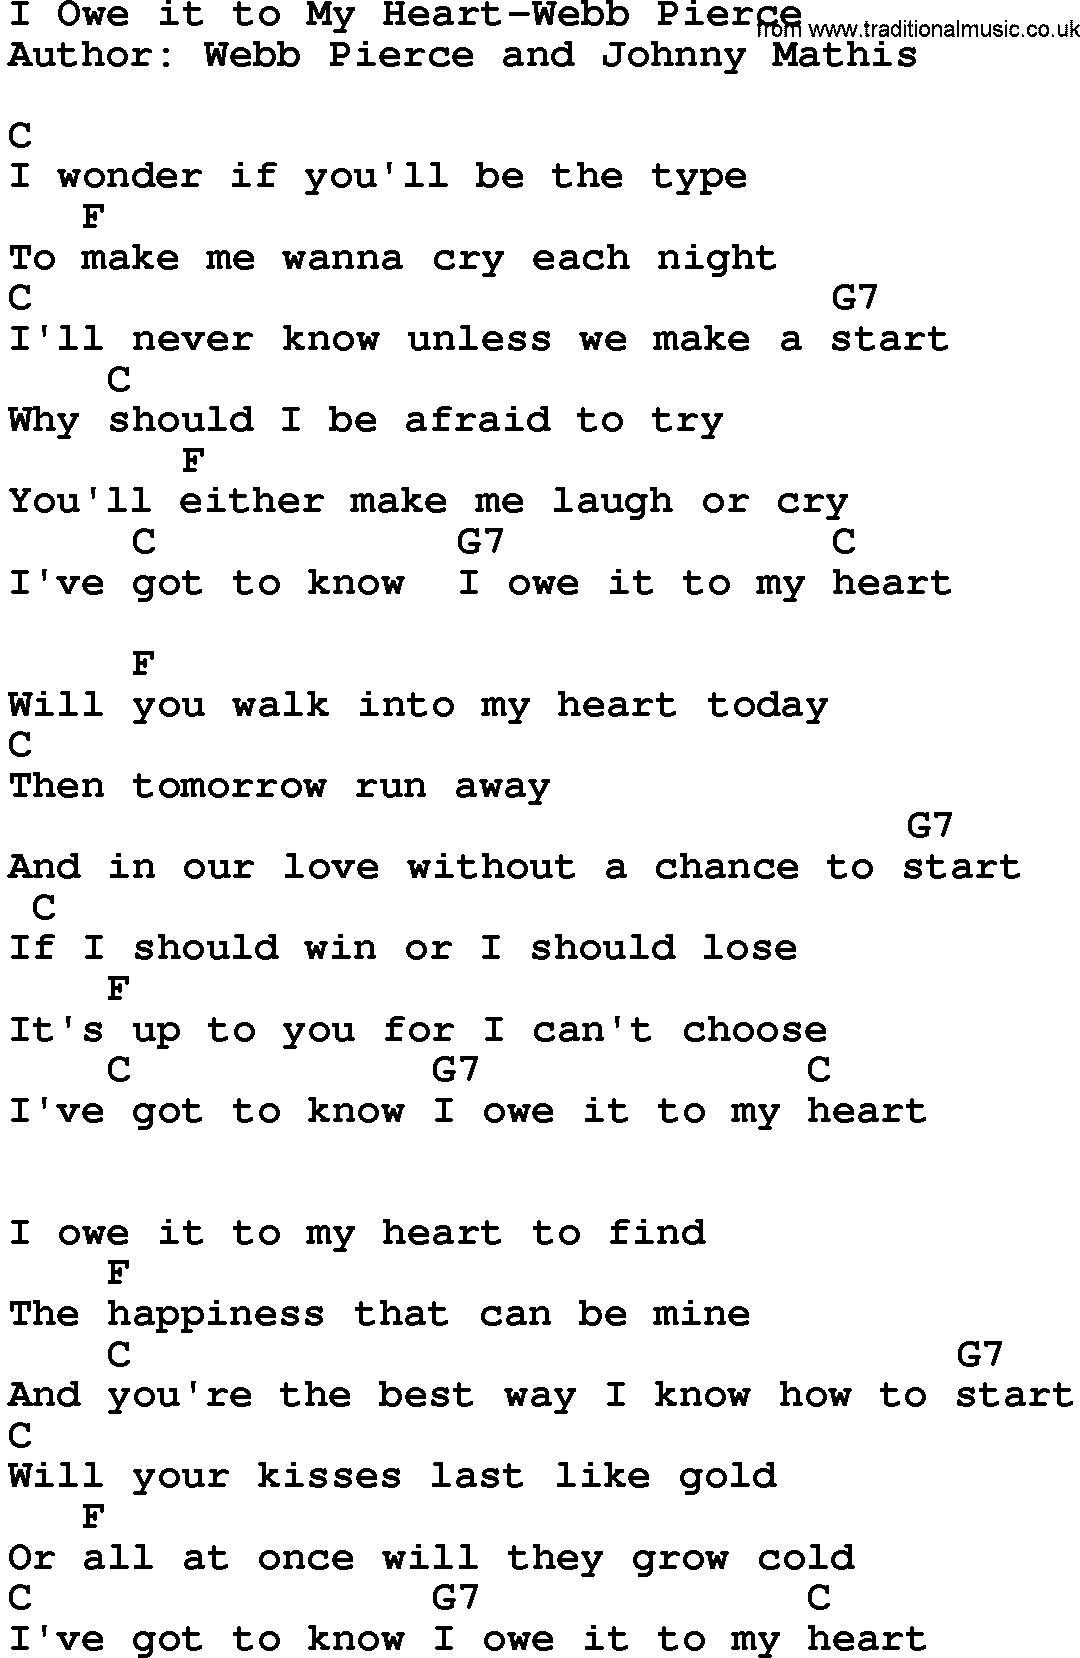 Country music song: I Owe It To My Heart-Webb Pierce lyrics and chords